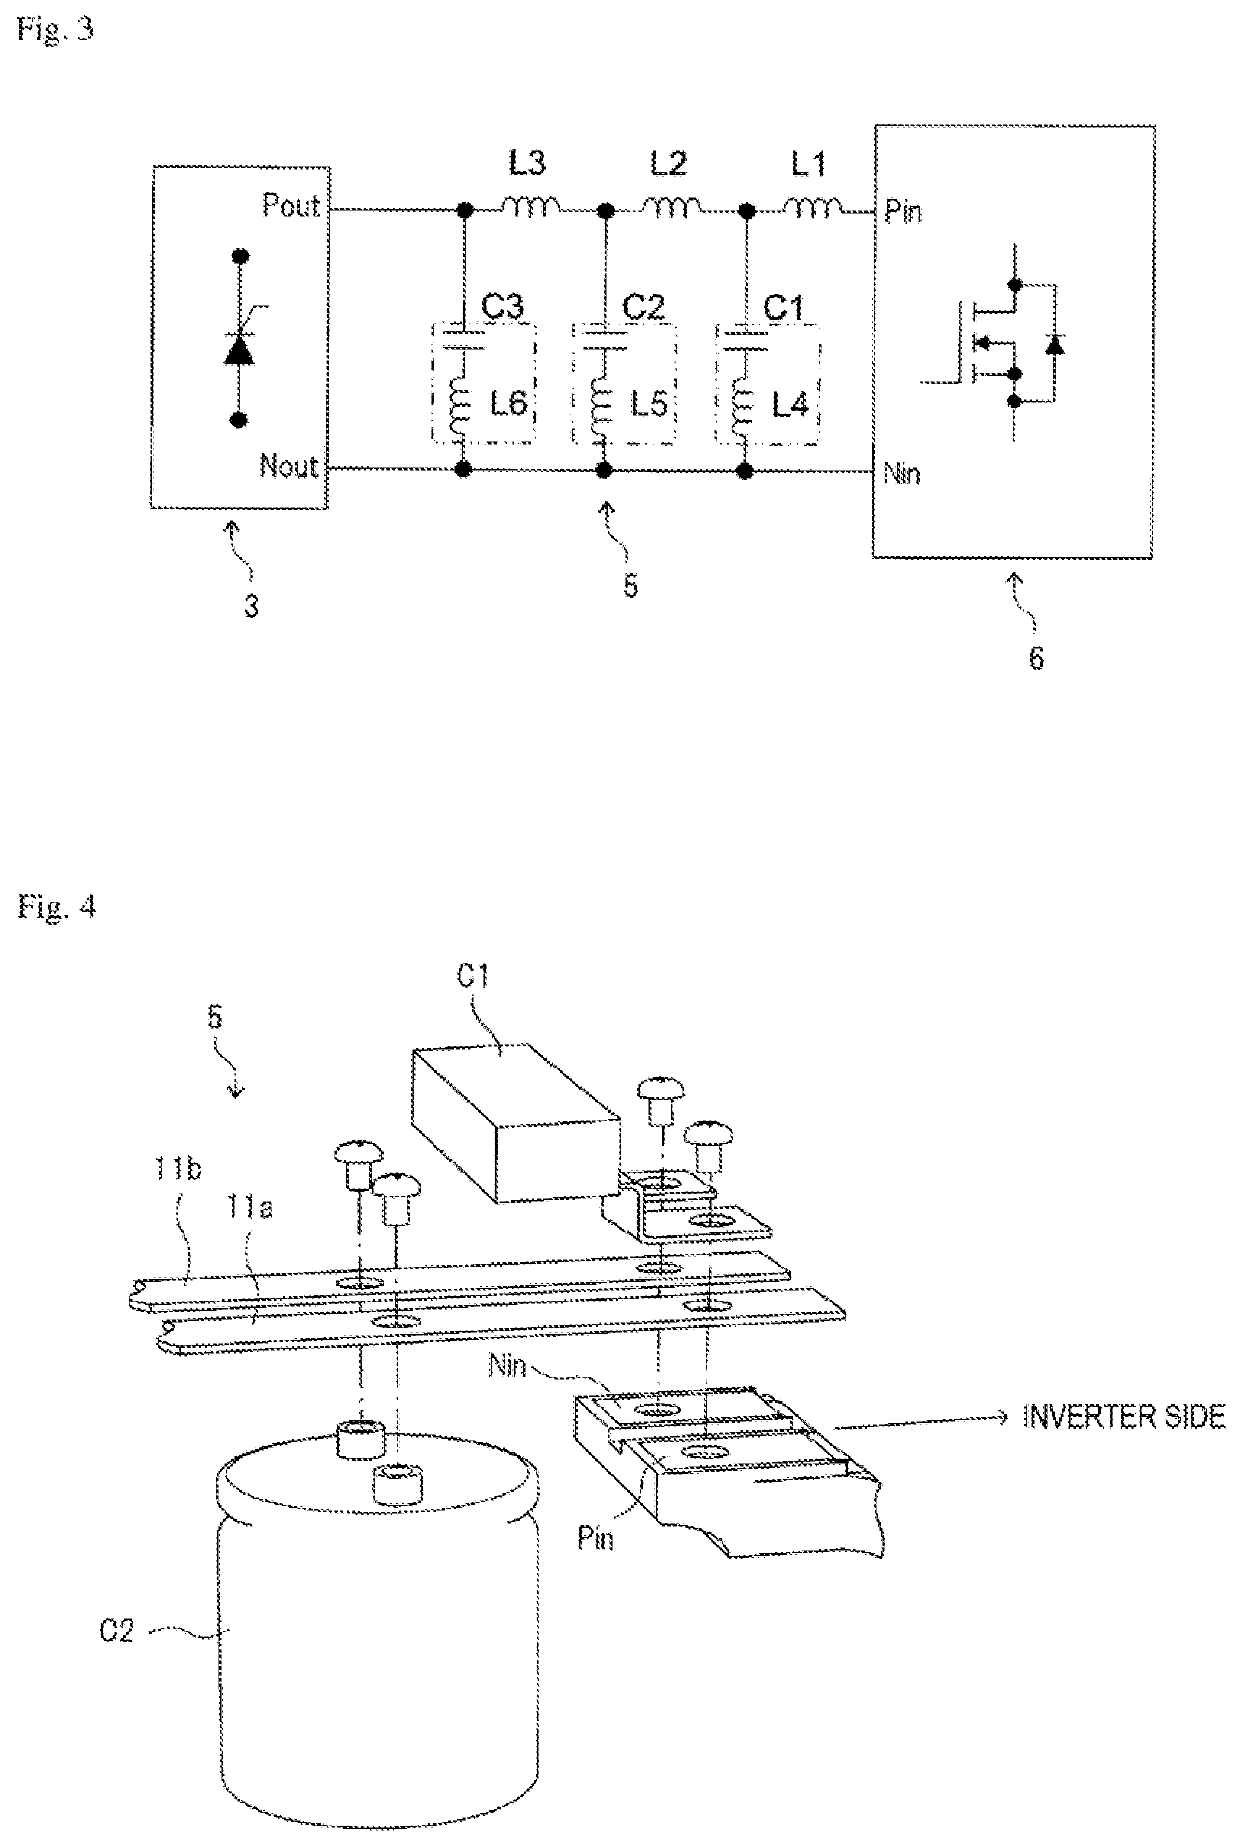 Power supply apparatus for induction heating